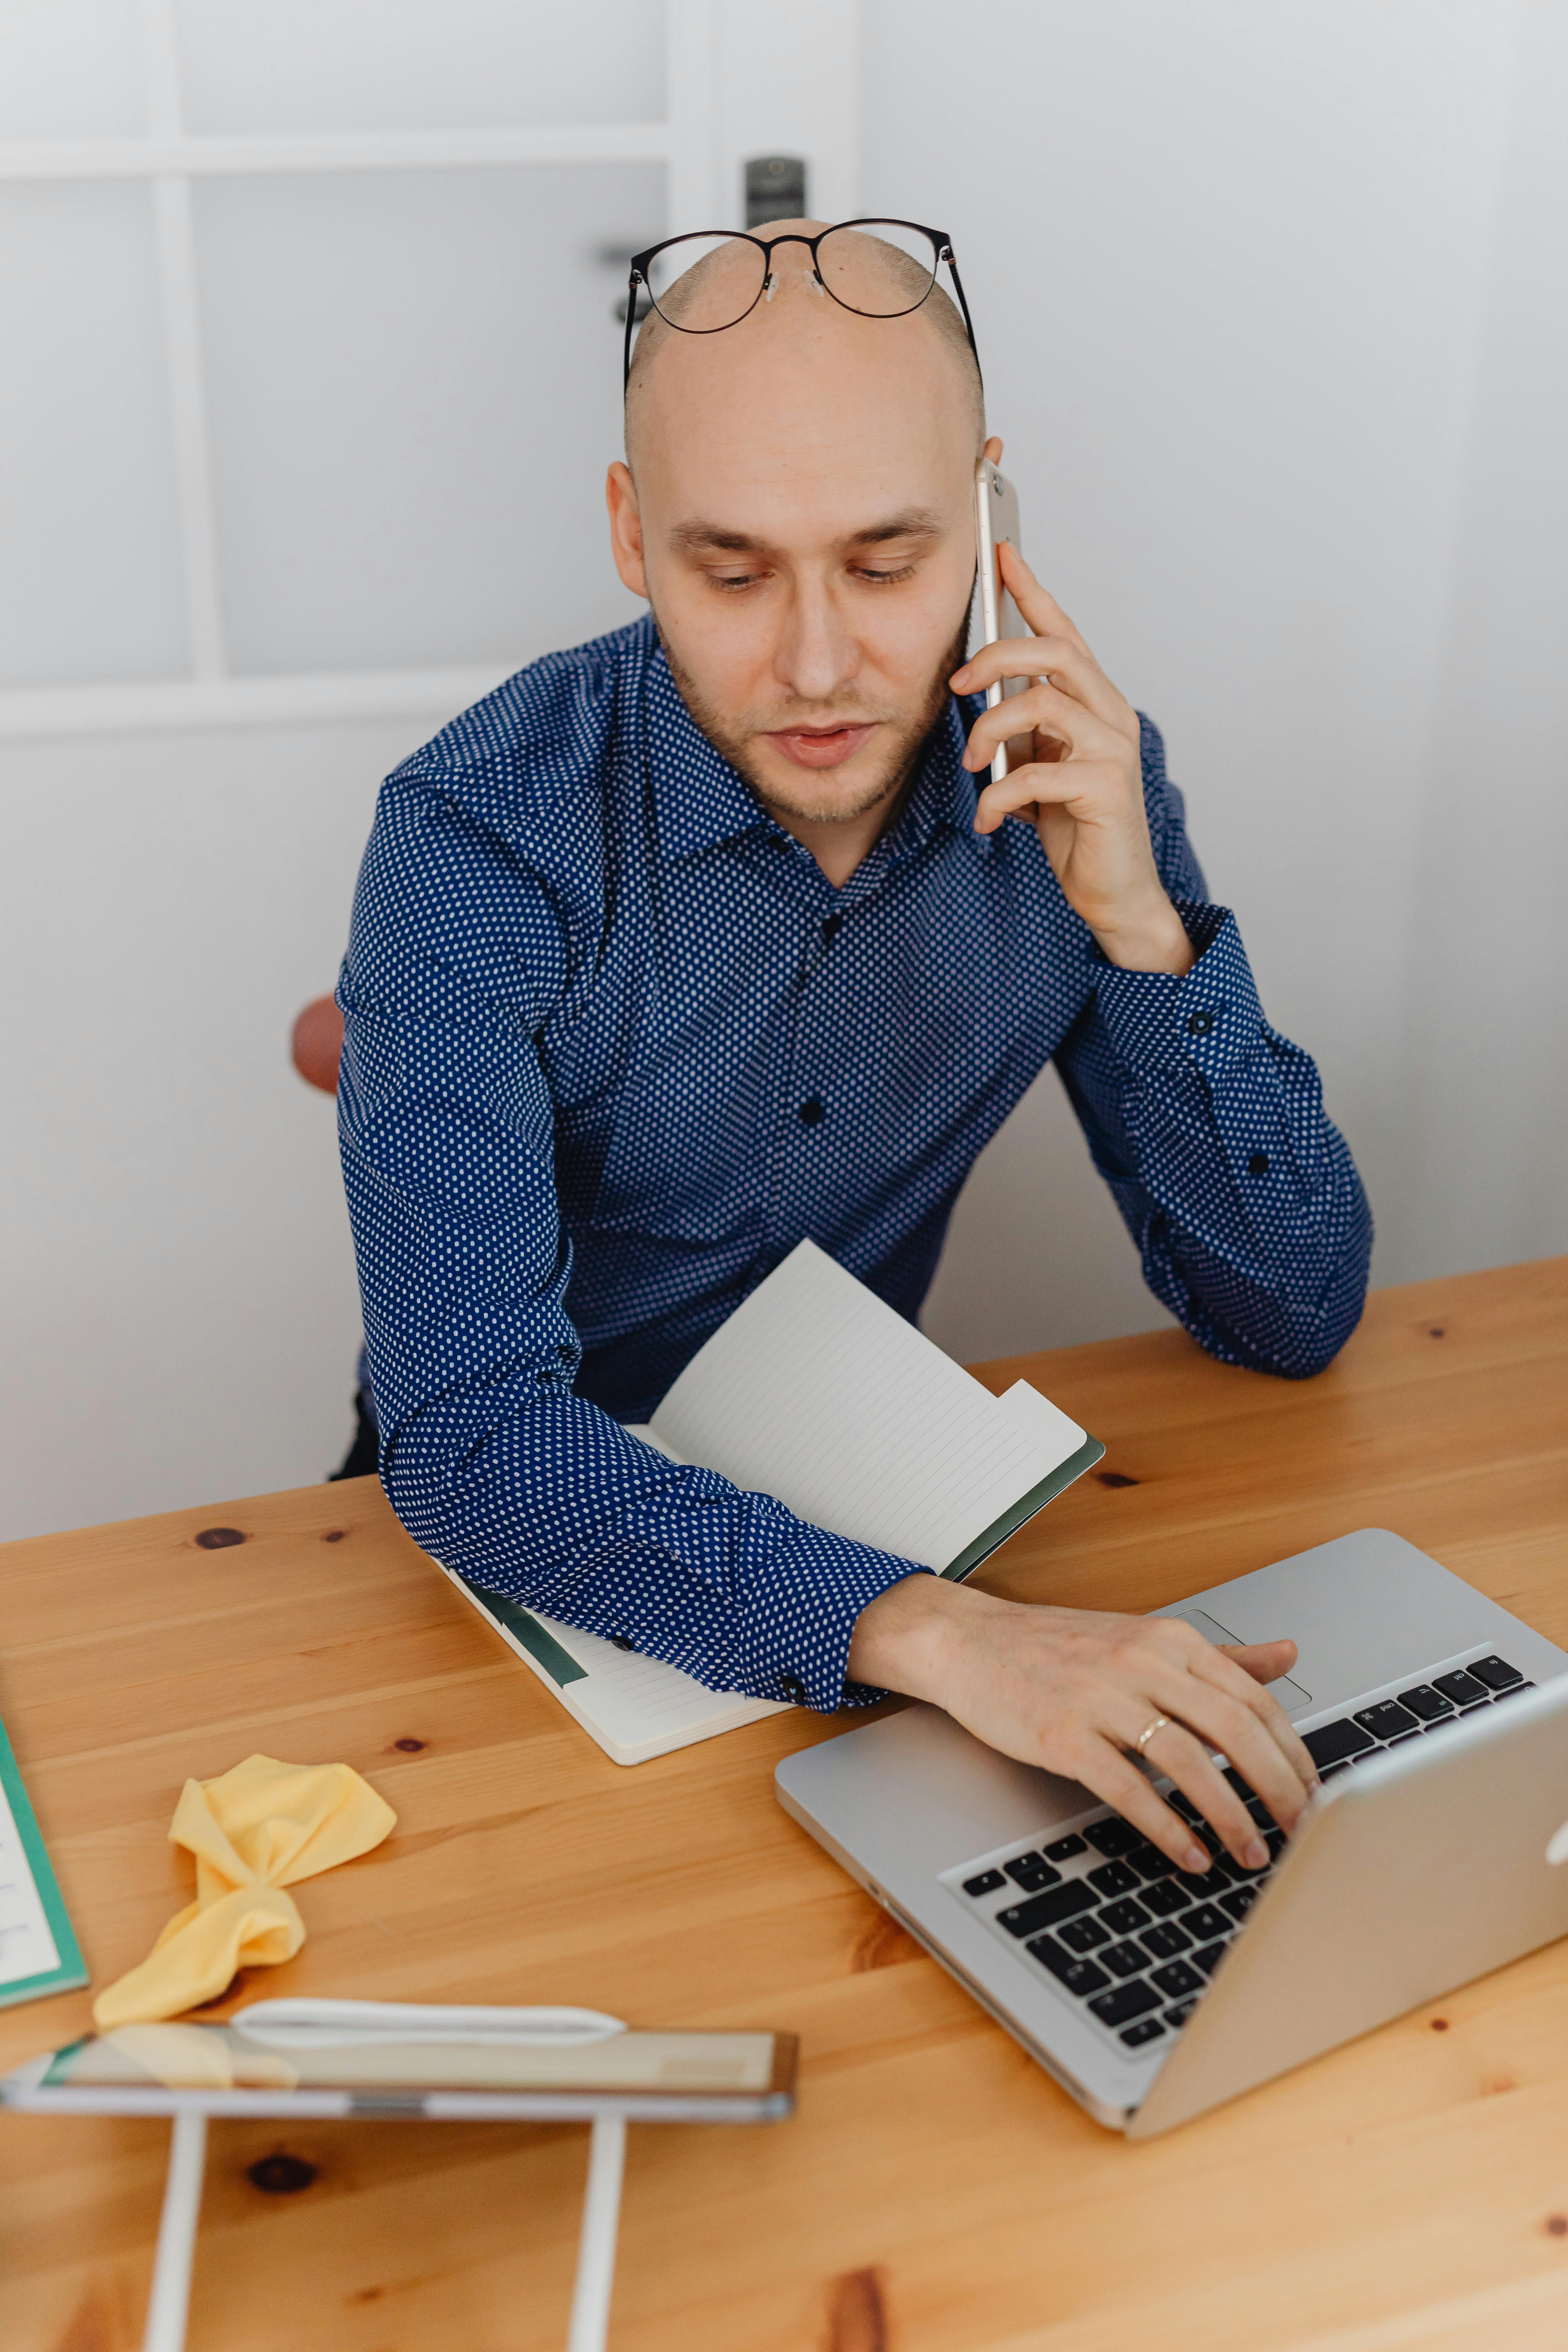 A formally dressed man on a phone call while working on a laptop | Source: Pexels